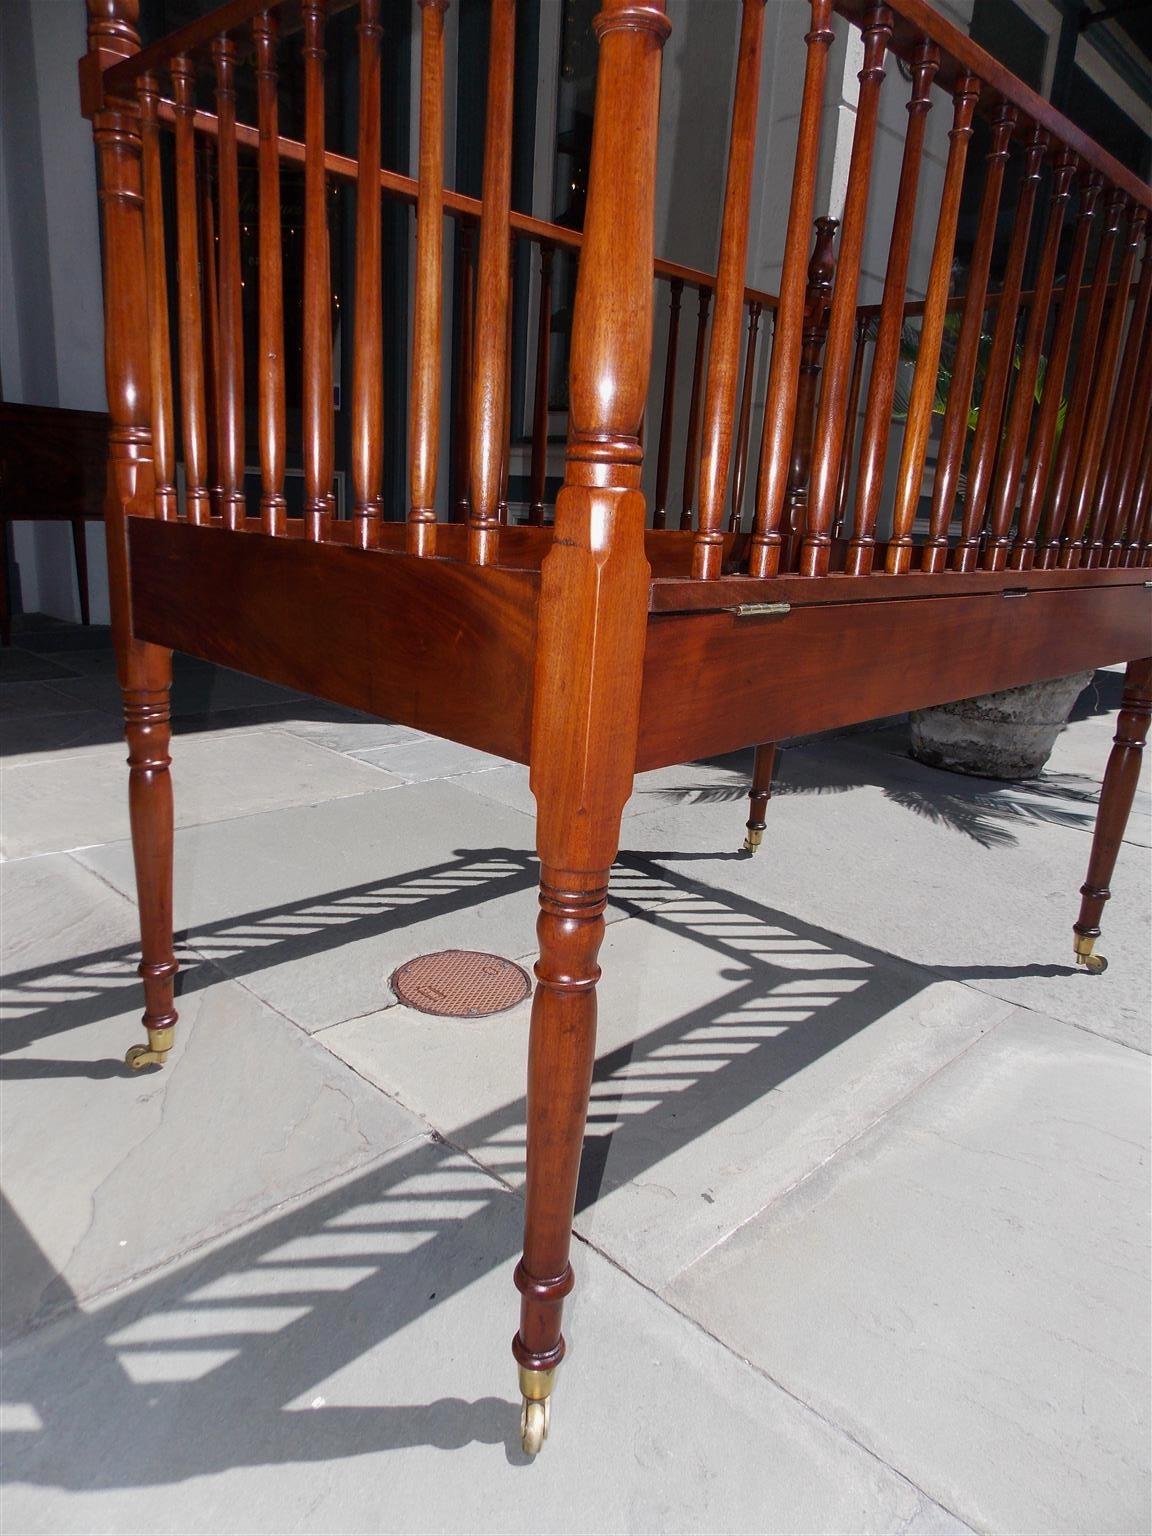 Brass American Charleston Mahogany Child's Crib with Bulbous Spindles on Casters, 1800 For Sale